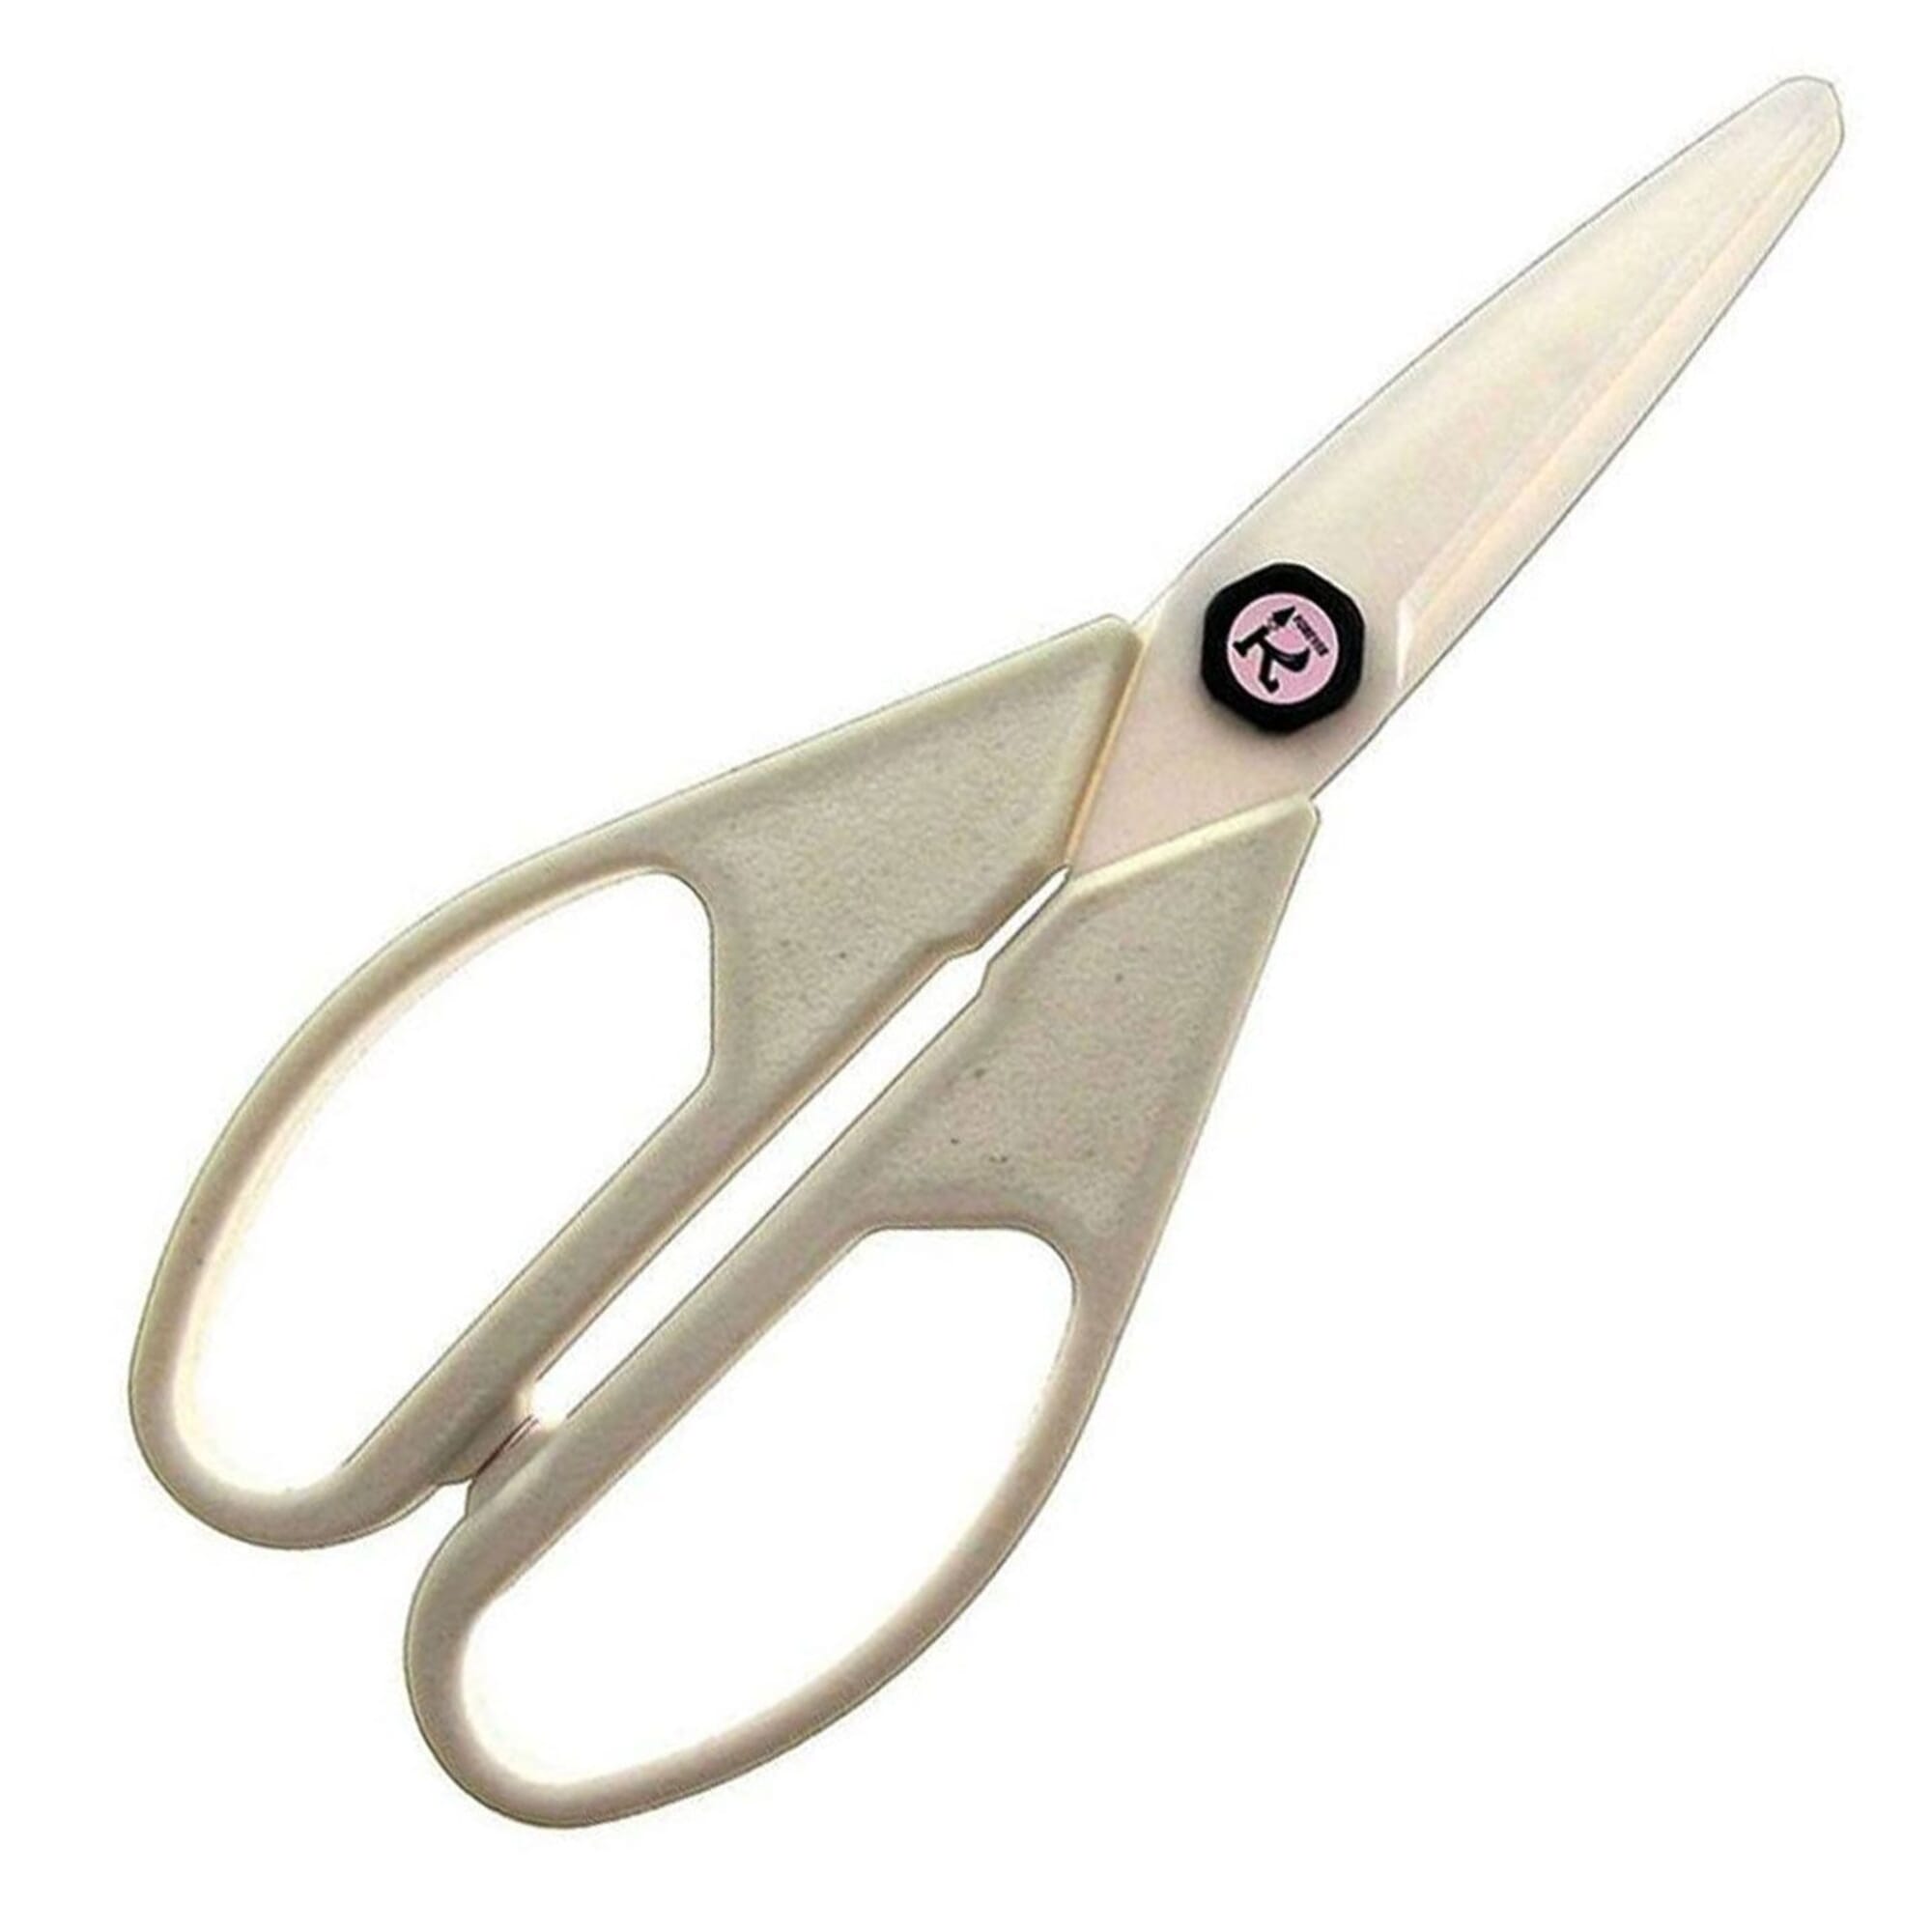 HASEGAWA Scissors for Paper Cutting Craft DSA-100 Japan's Best to You